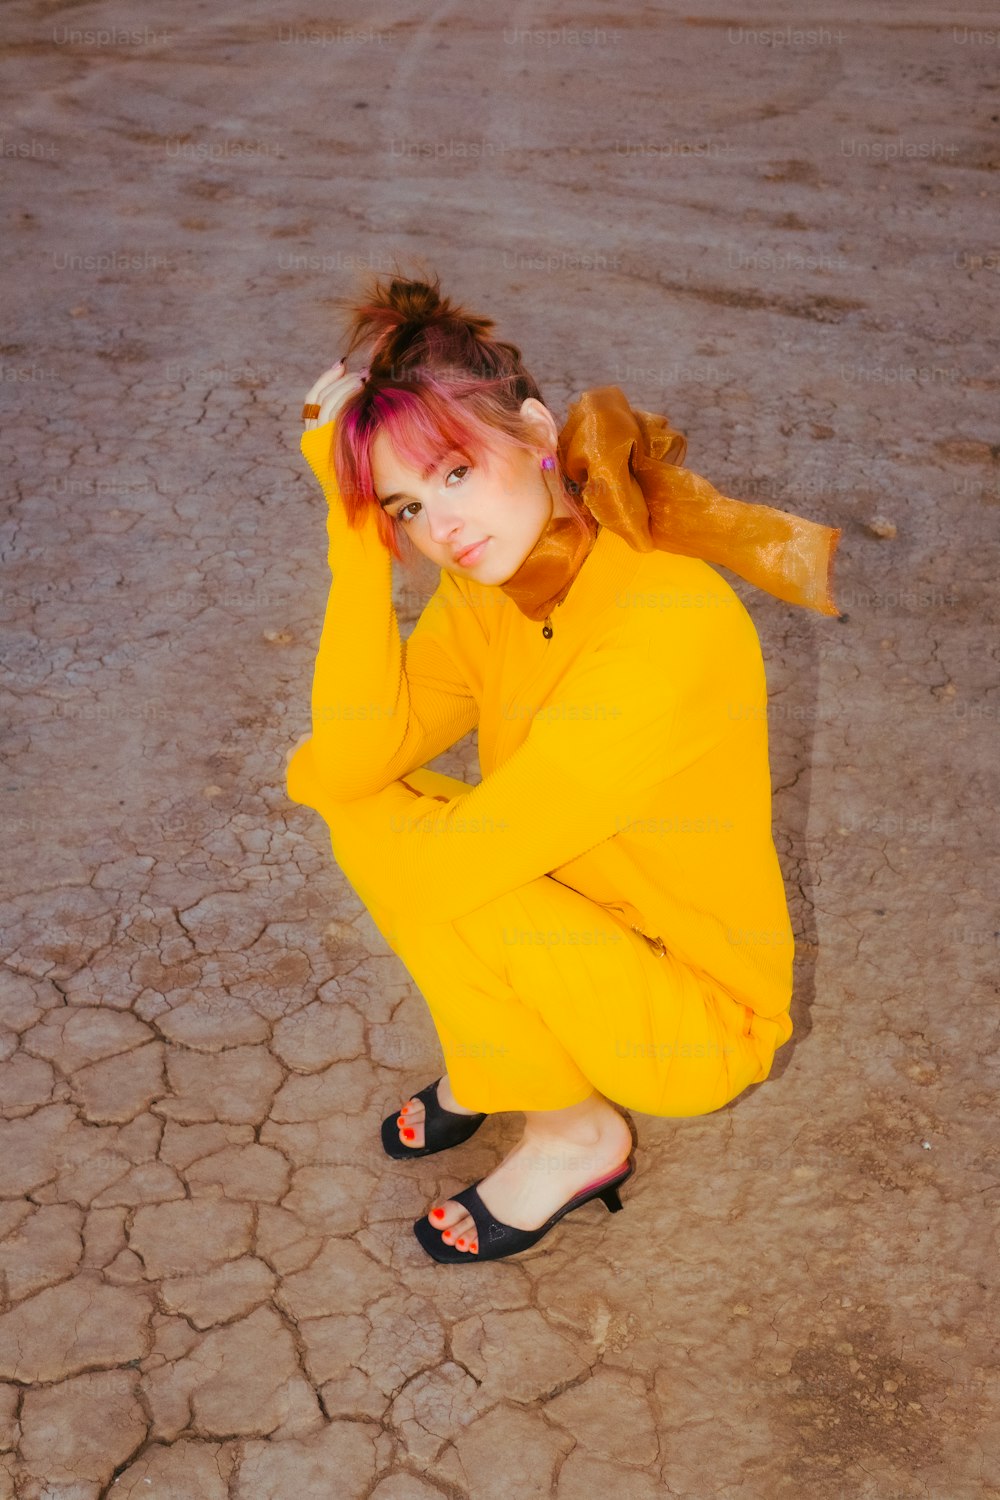 a woman in a yellow outfit sitting on the ground